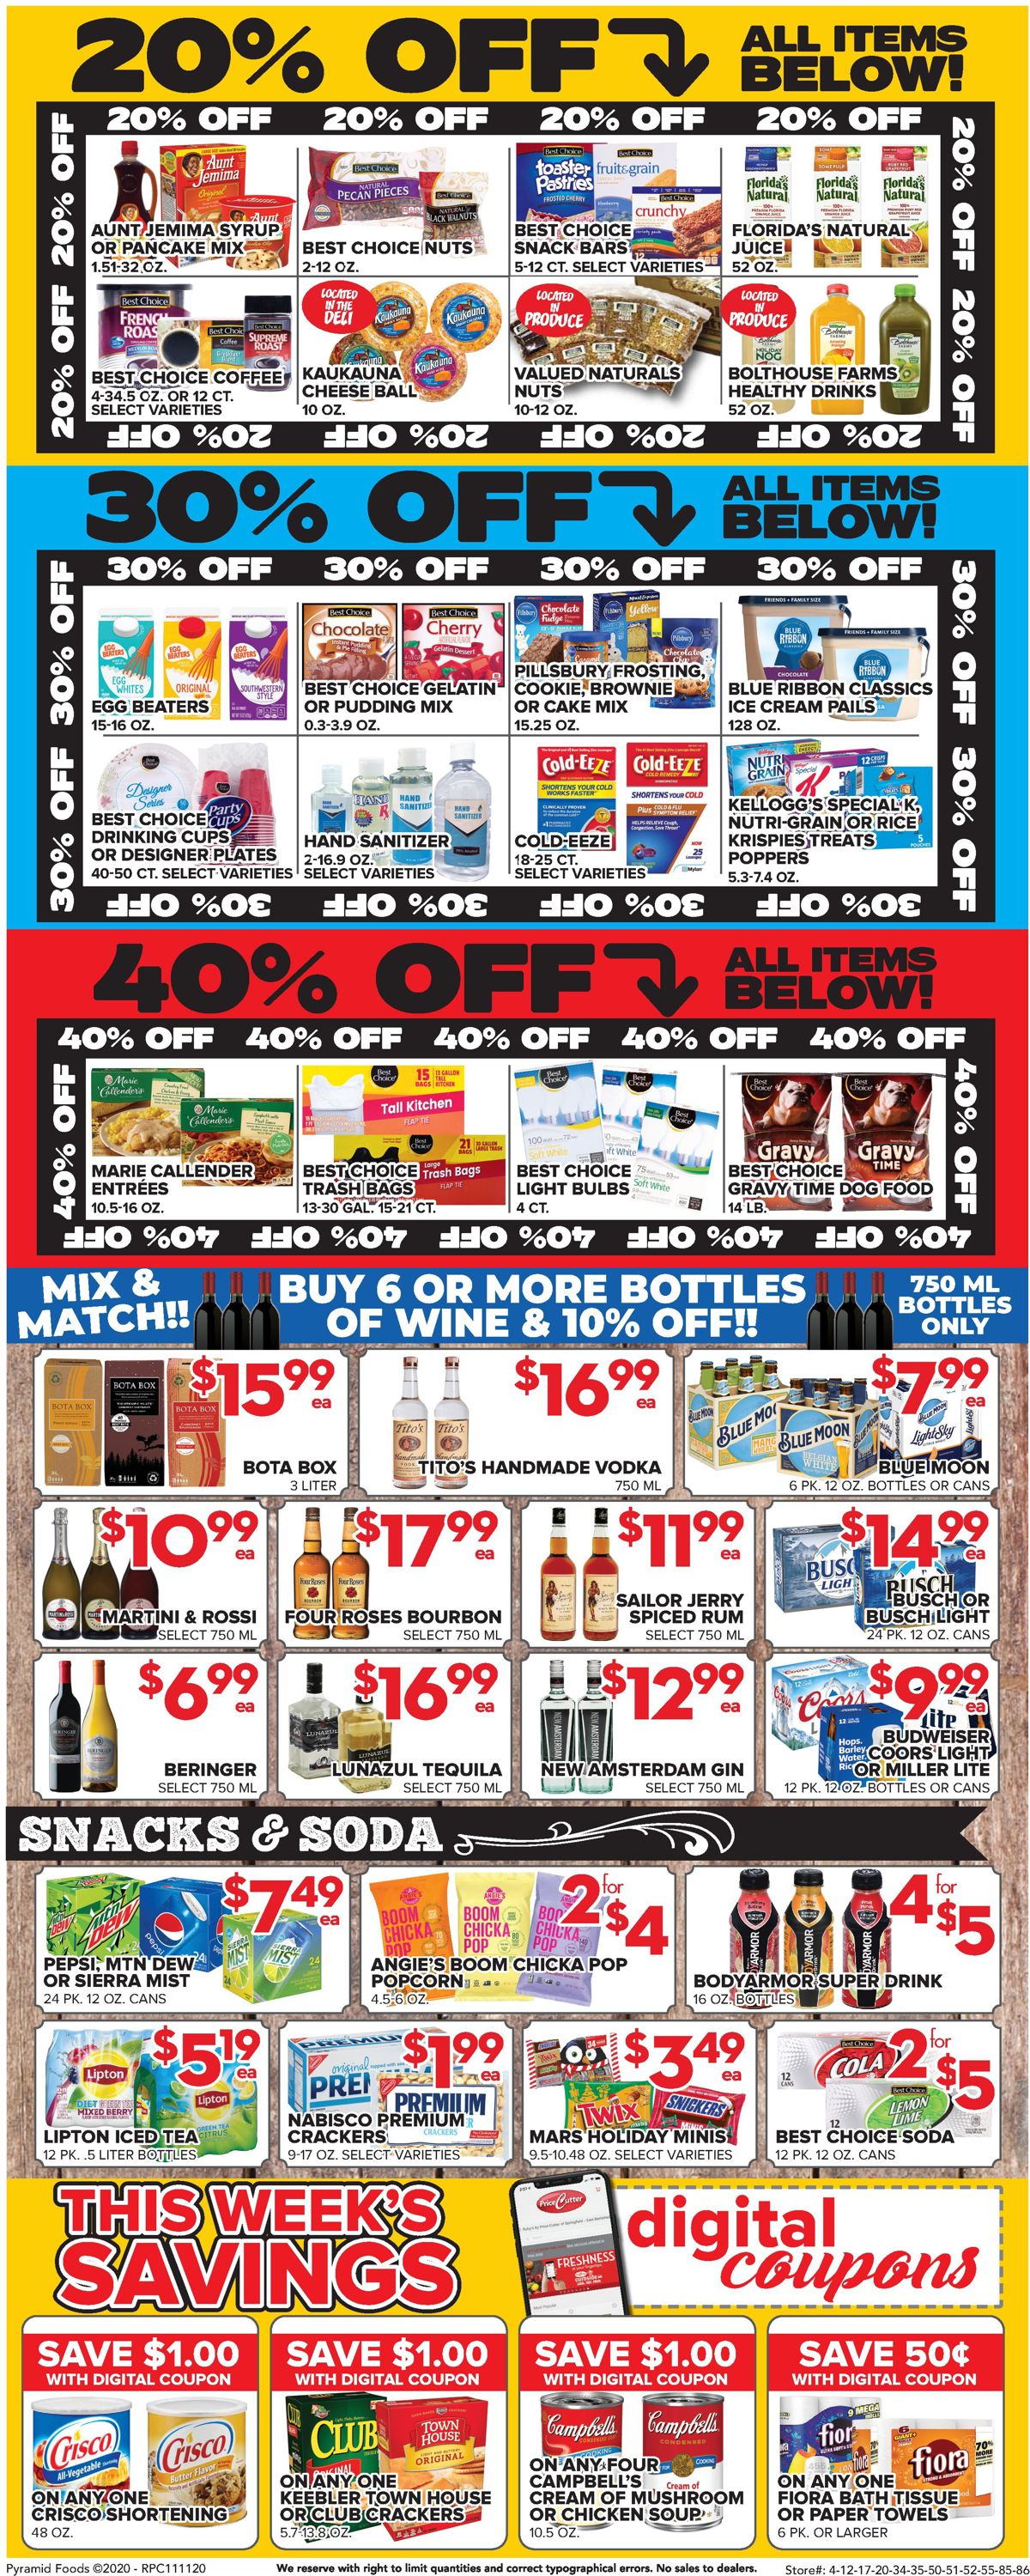 Price Cutter Weekly Ad Circular - valid 11/11-11/17/2020 (Page 4)